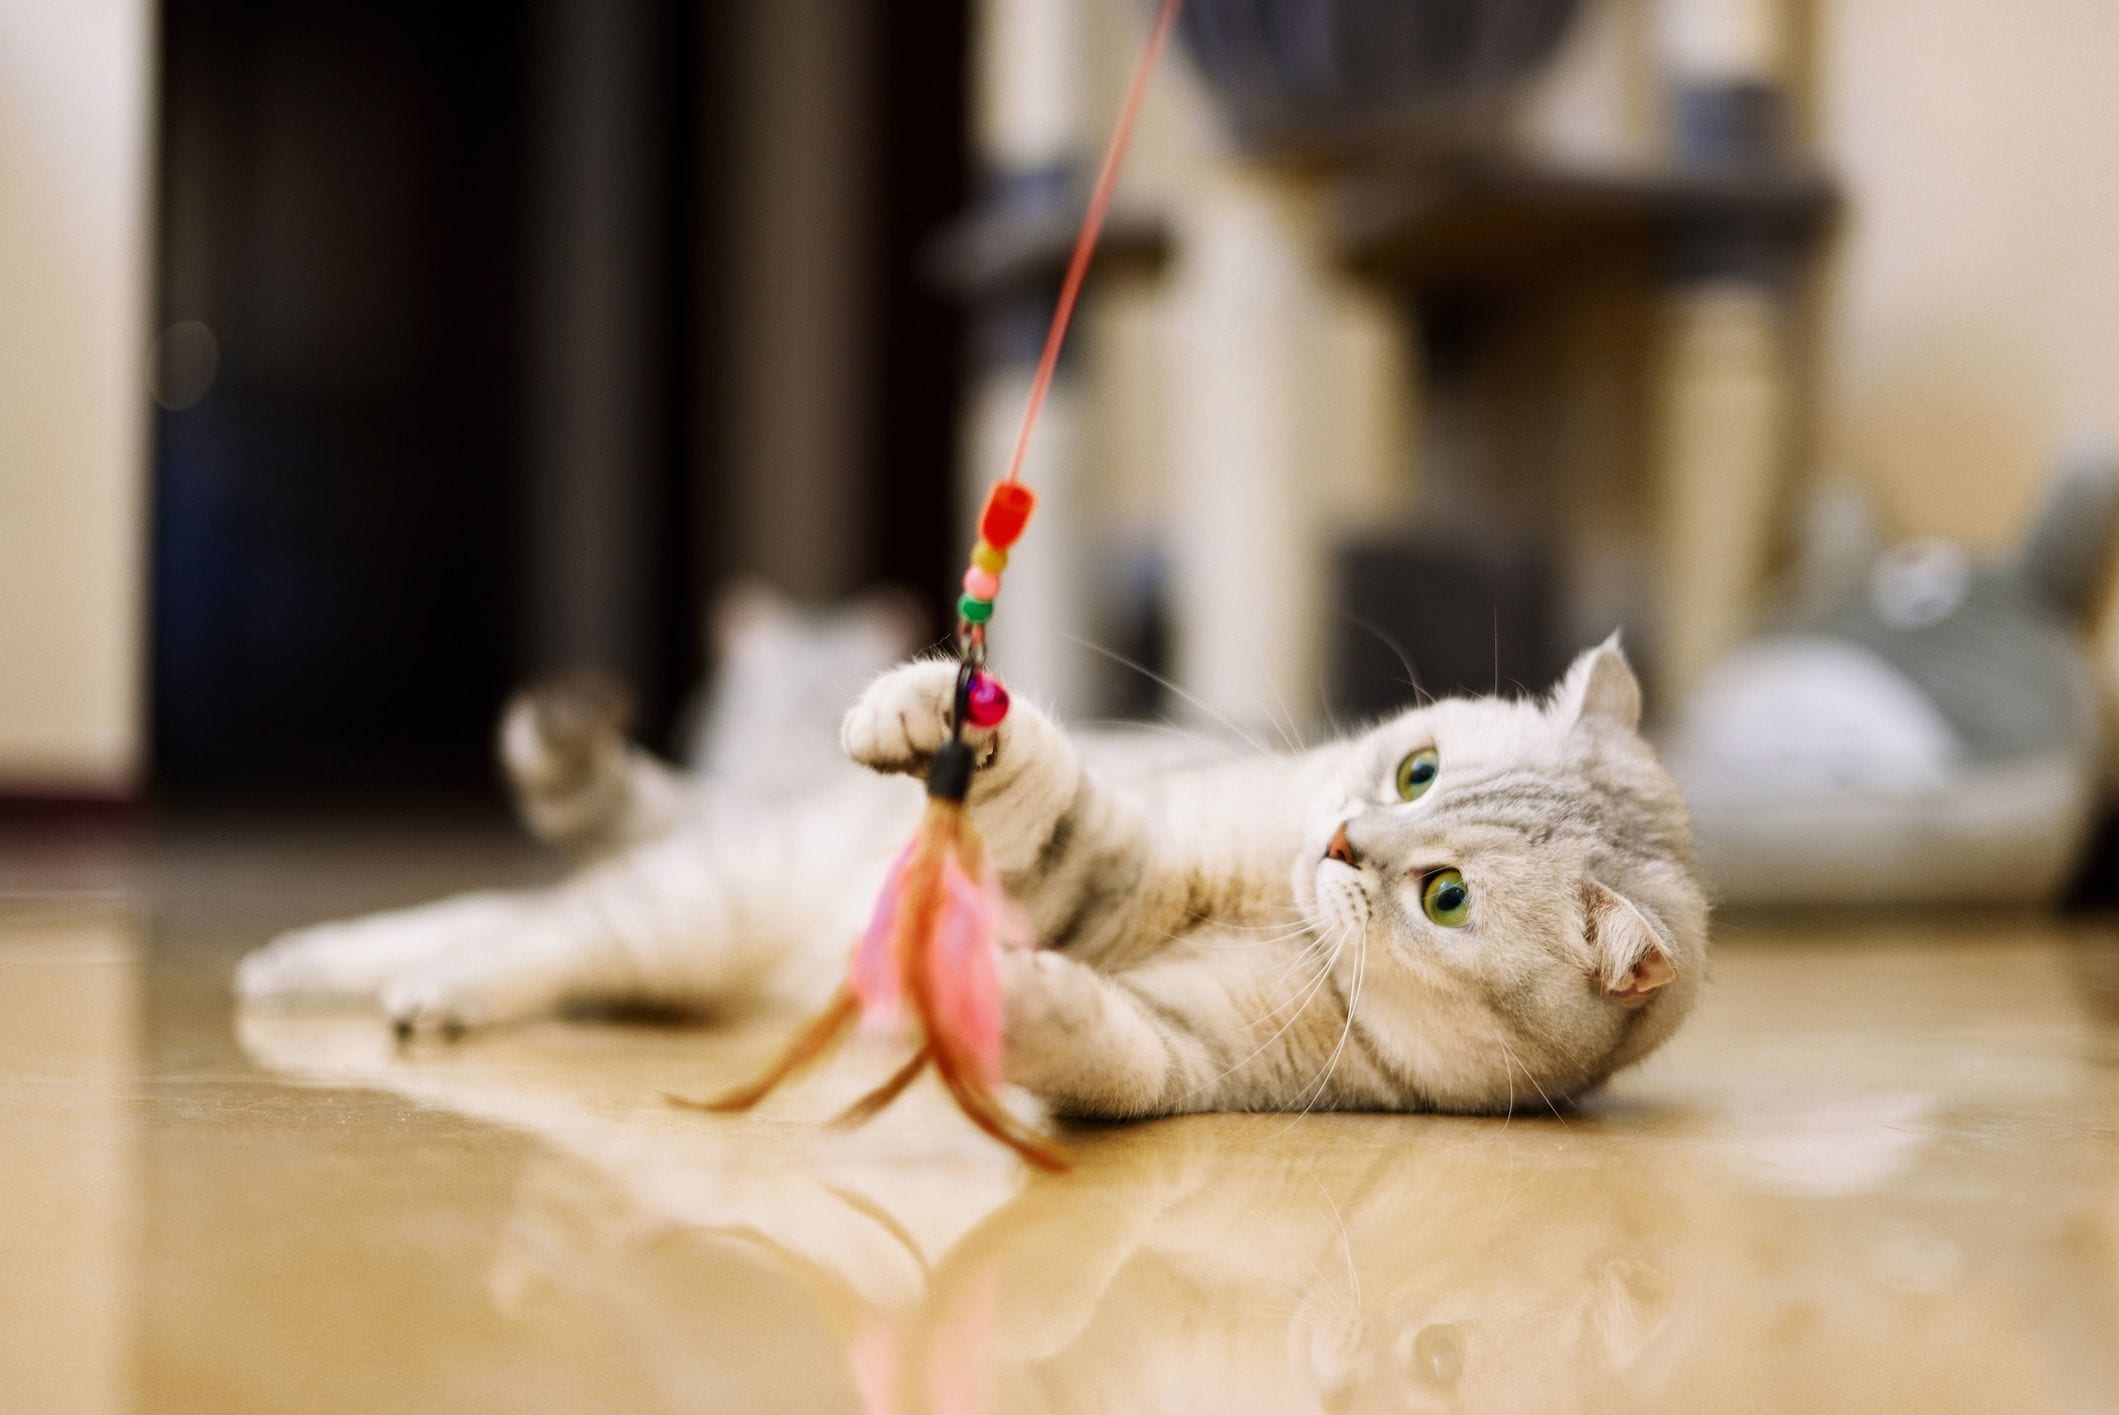 20 fun and easy DIY cat toys that kitties can’t resist